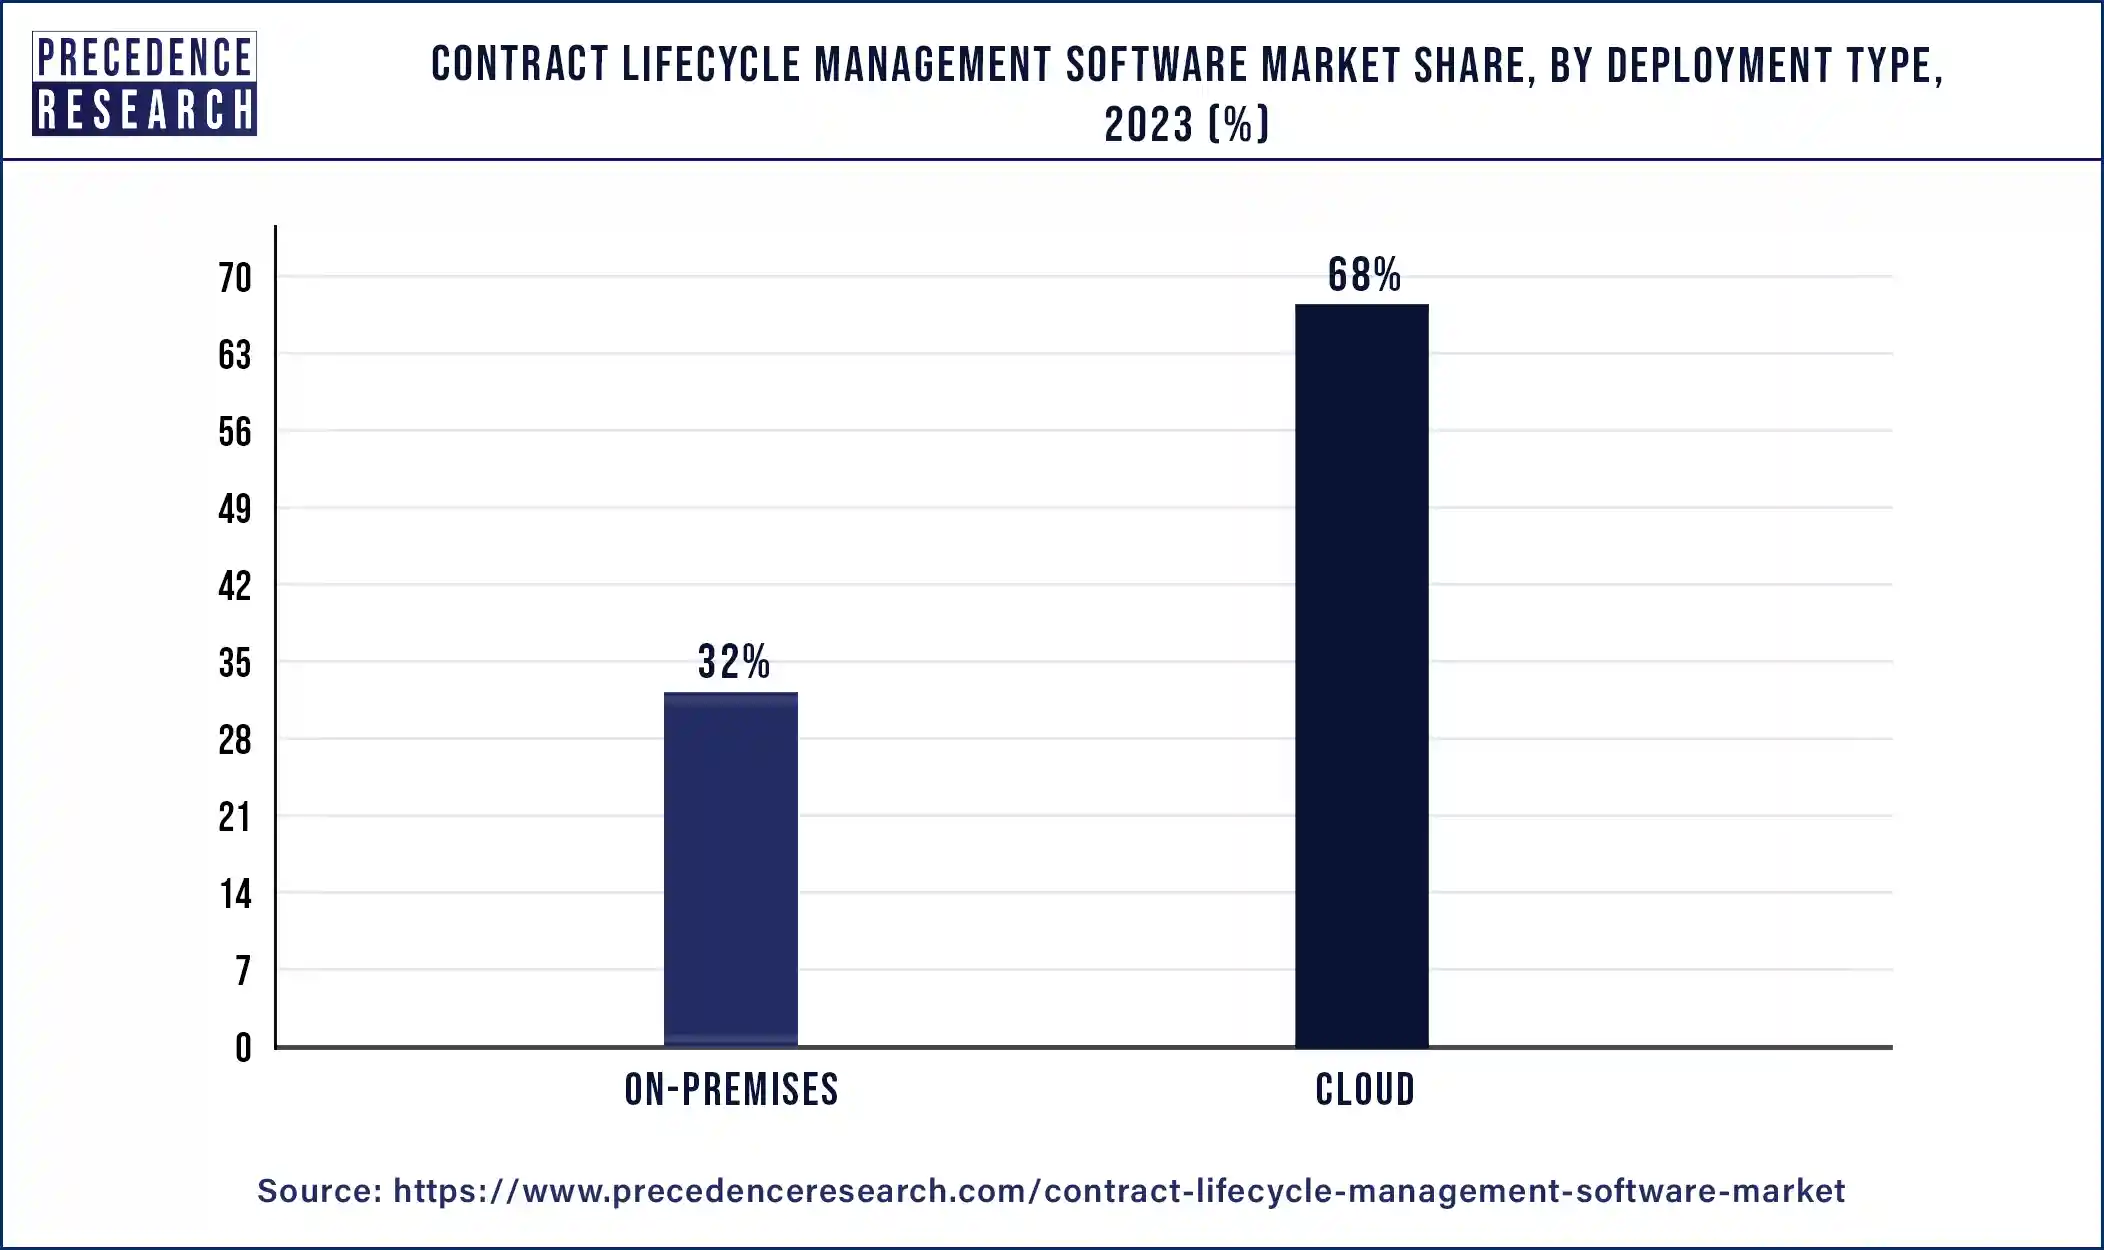 Contract Lifecycle Management Software Market Share, By Deployment Type, 2023 (%)